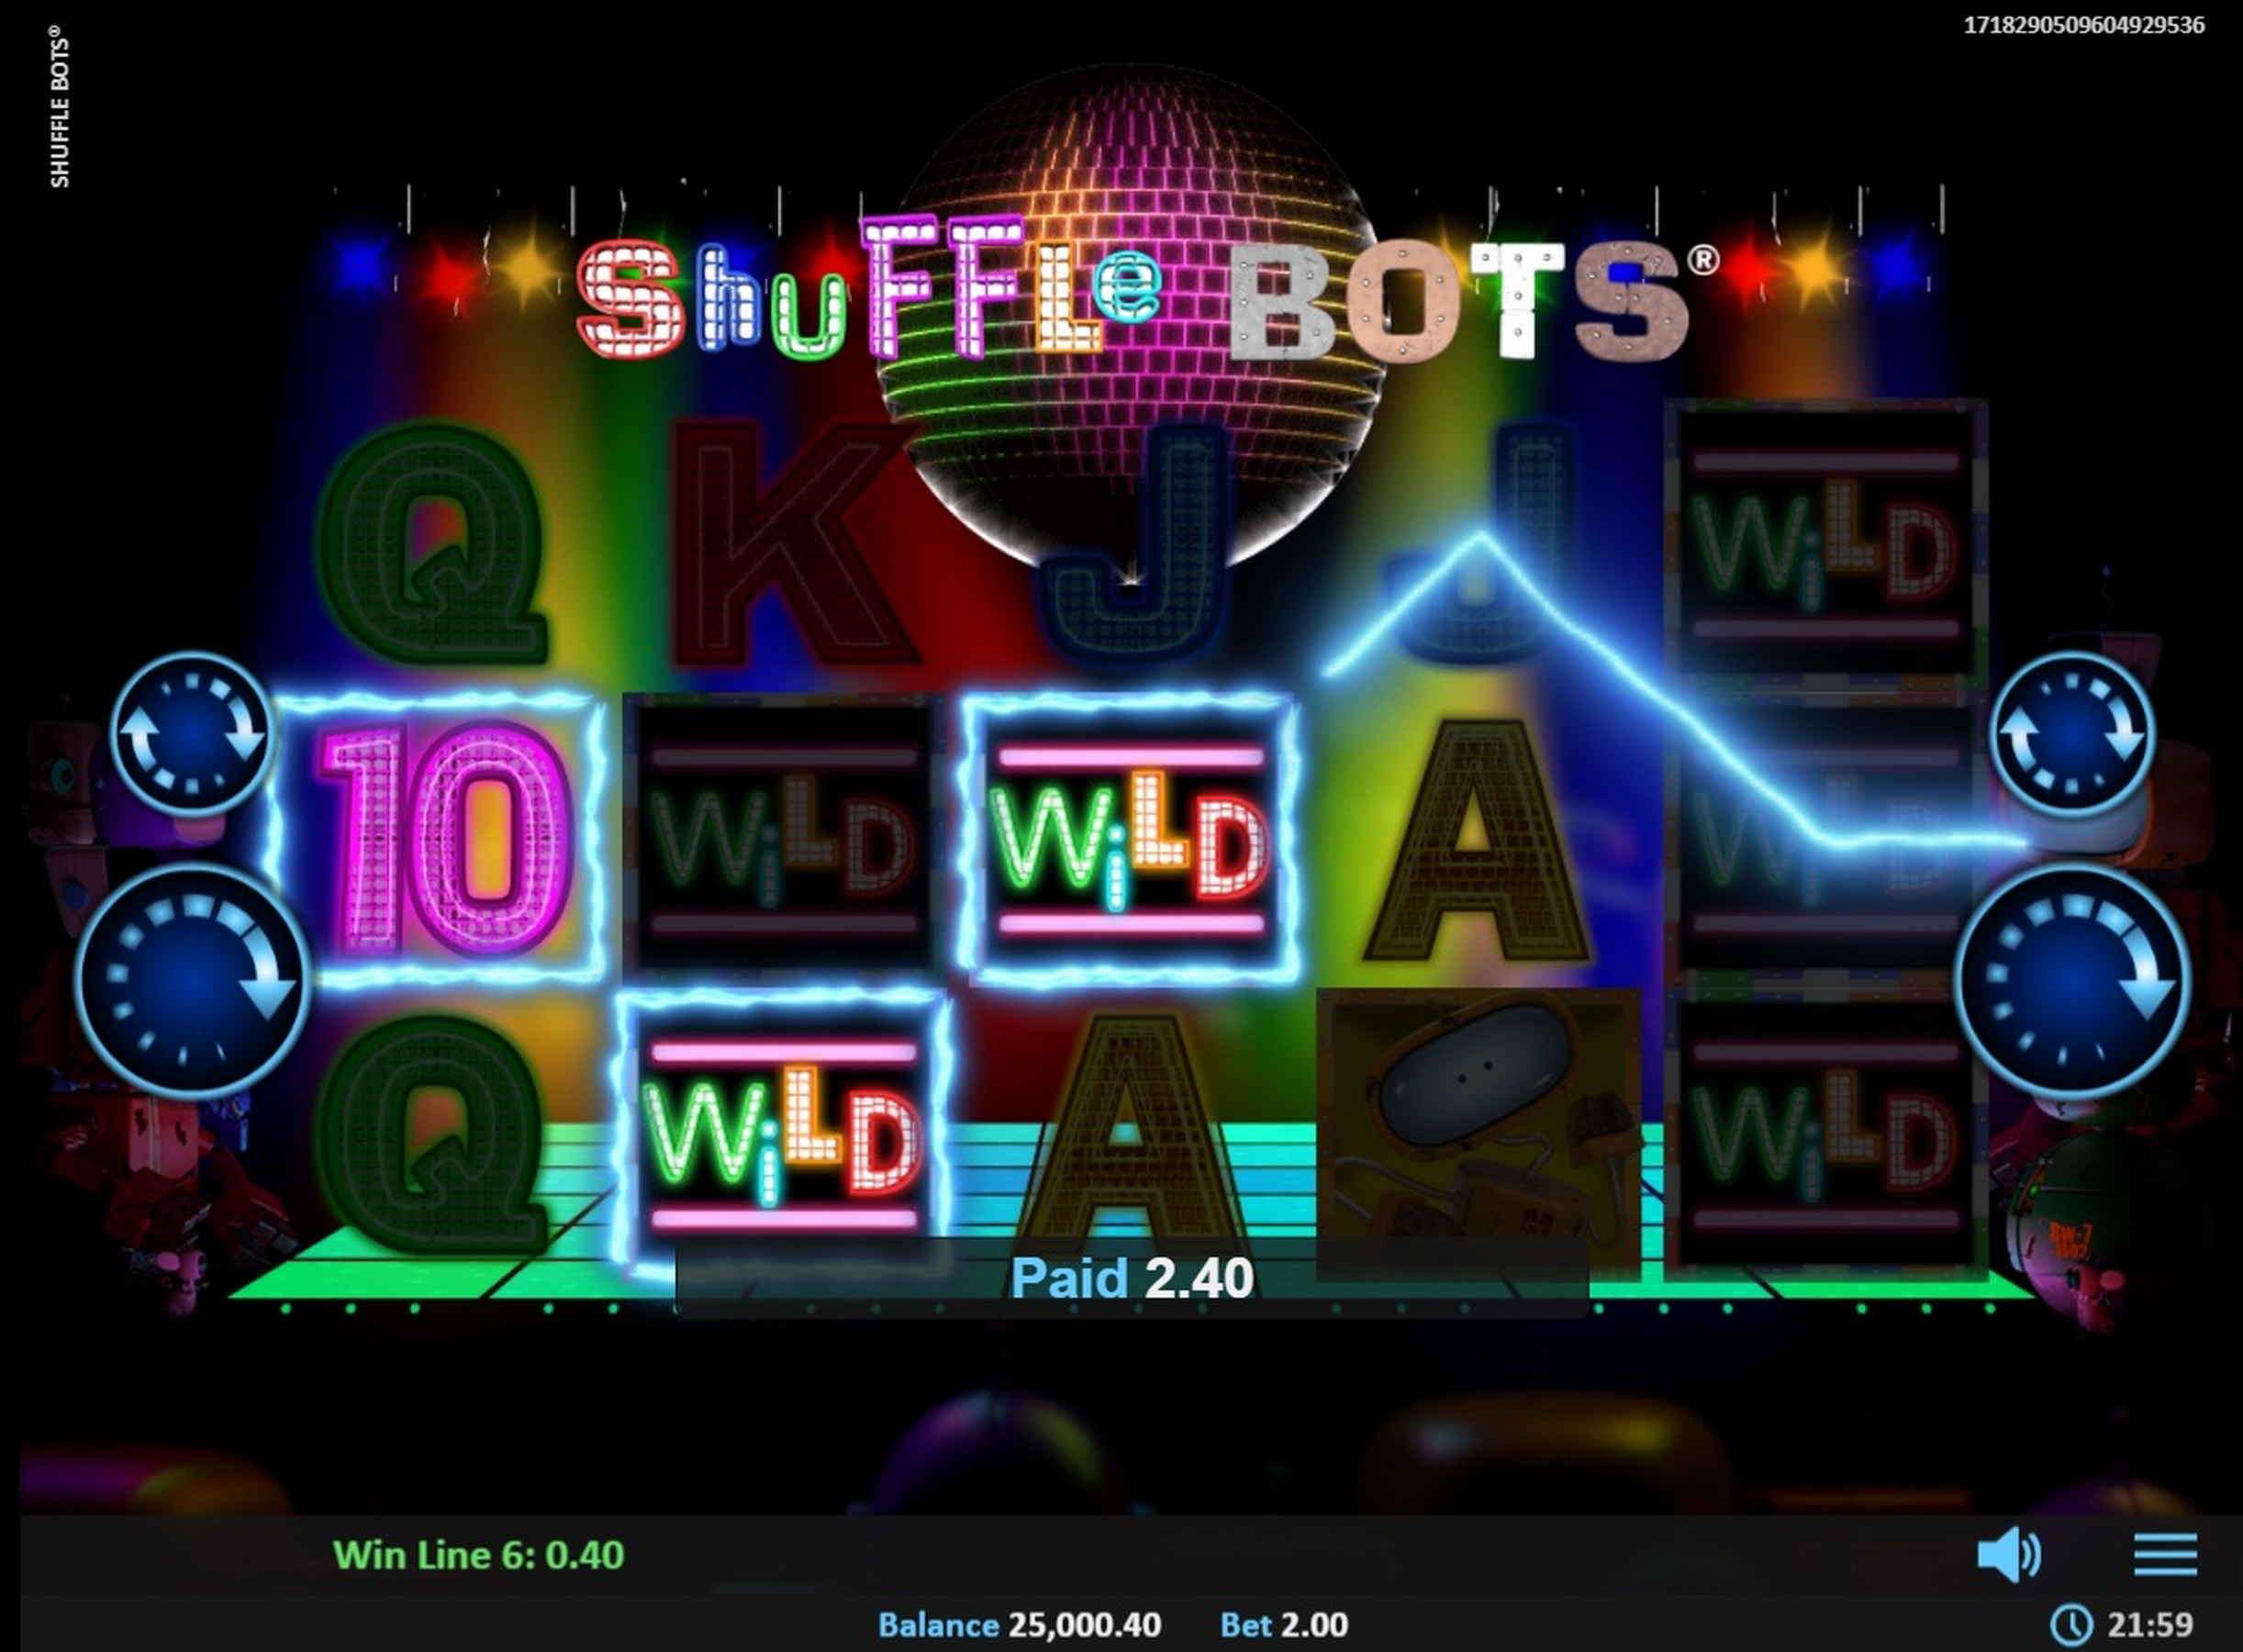 Win Money in Shuffle Bots Free Slot Game by Realistic Games